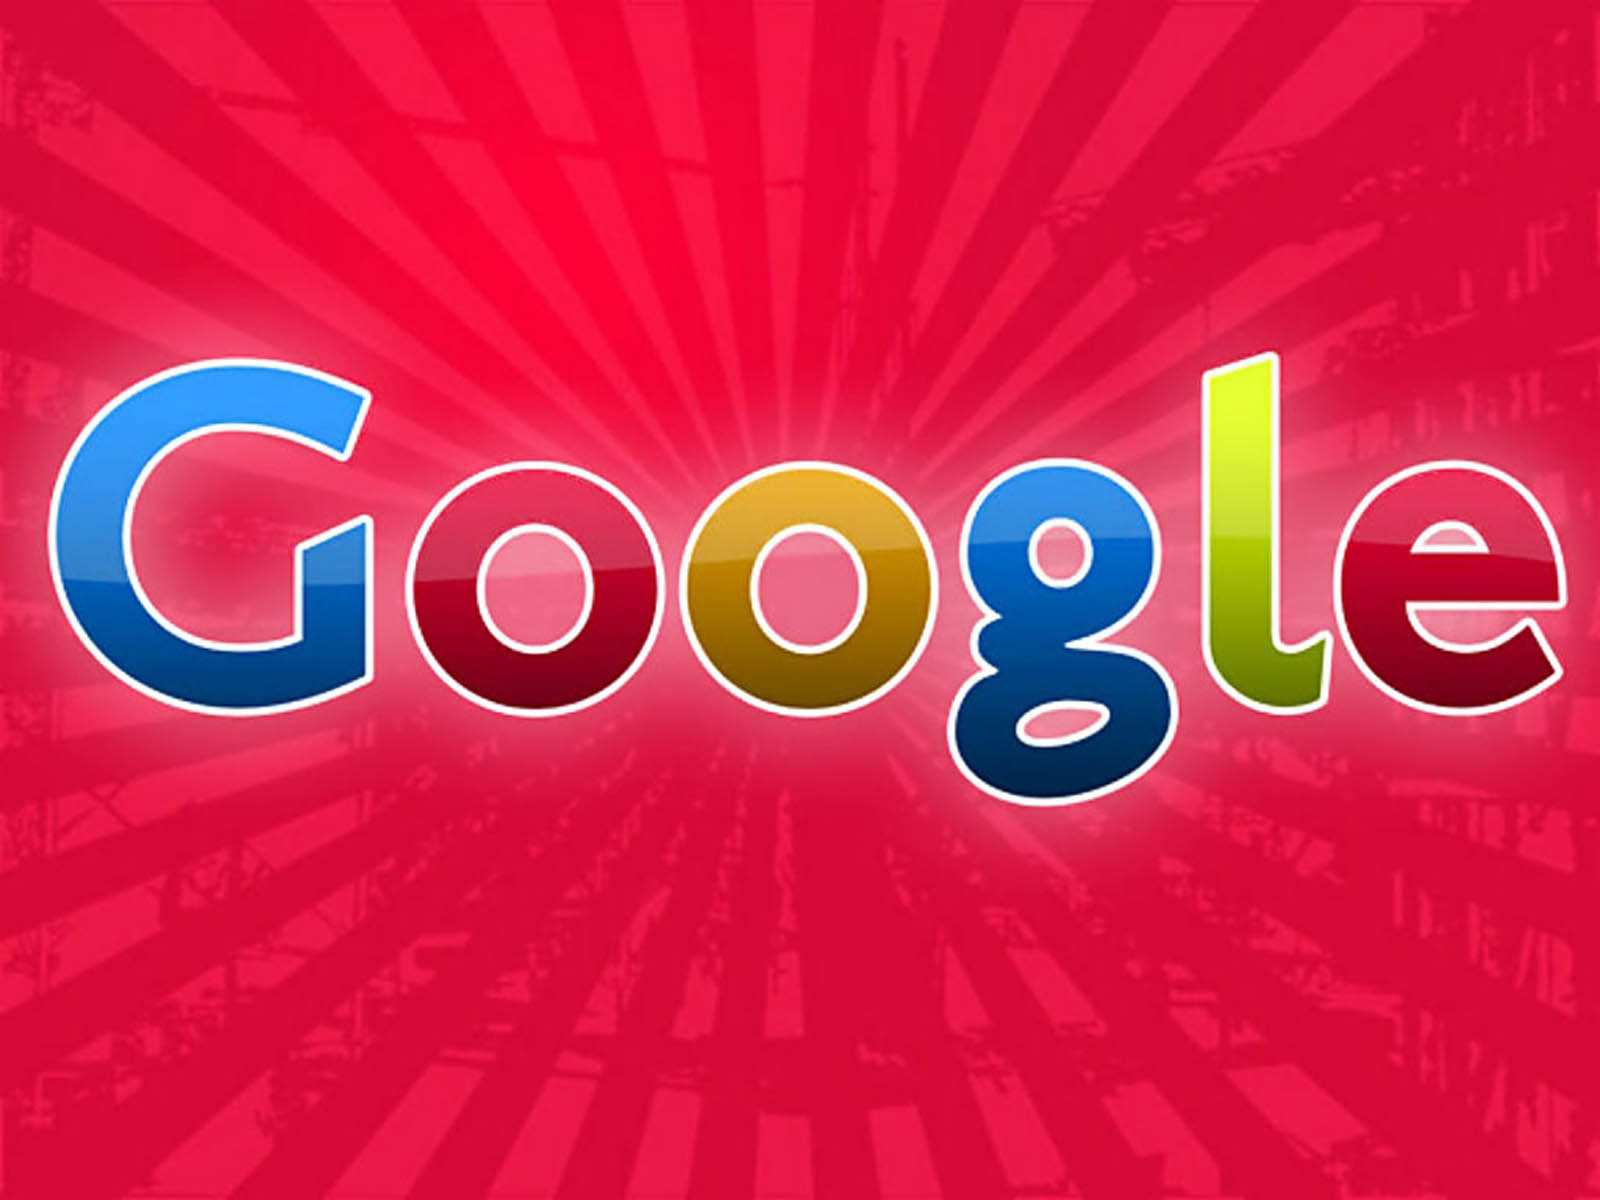 Google Wallpaper Background Paos Pictures And Image For